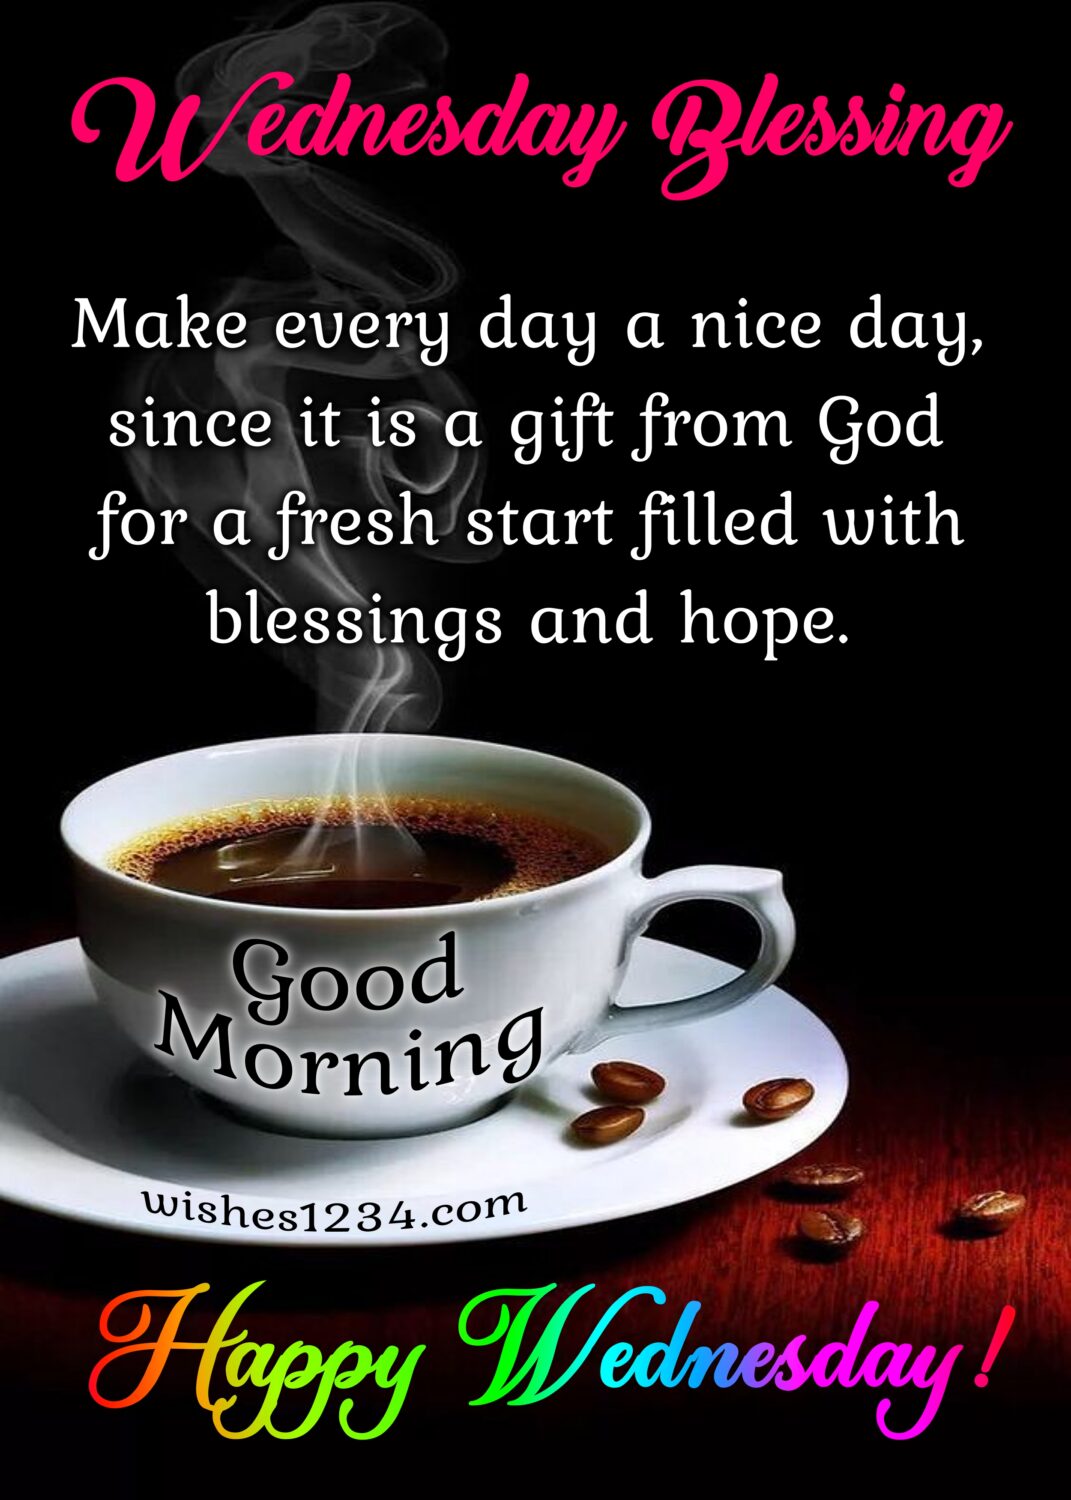 Wednesday blessings with white coffee cup, Happy Wednesday.